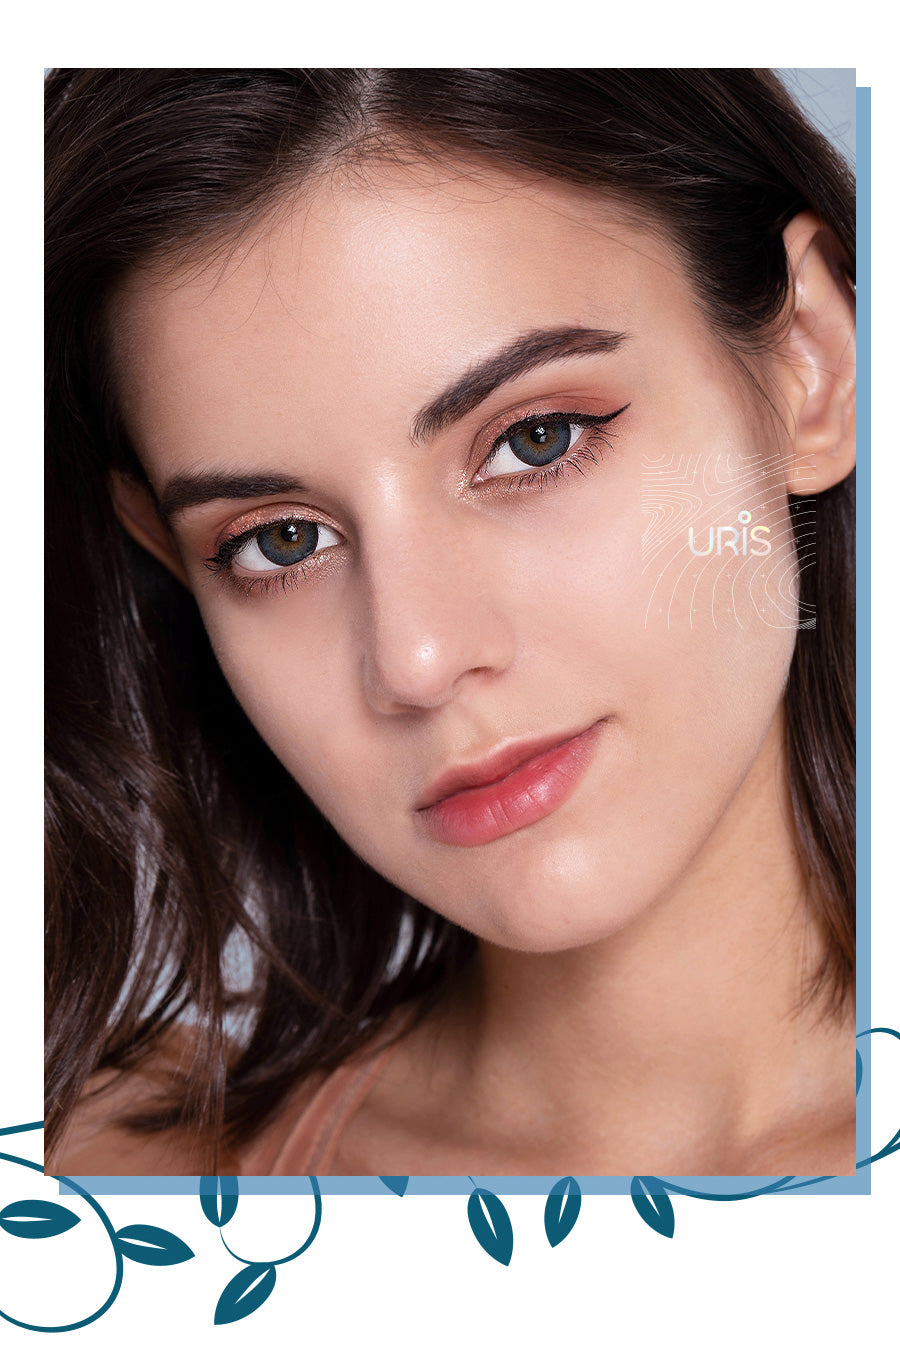 Close-up of Model wearing Uris Nymph Blue toric colored contacts for astigmatism